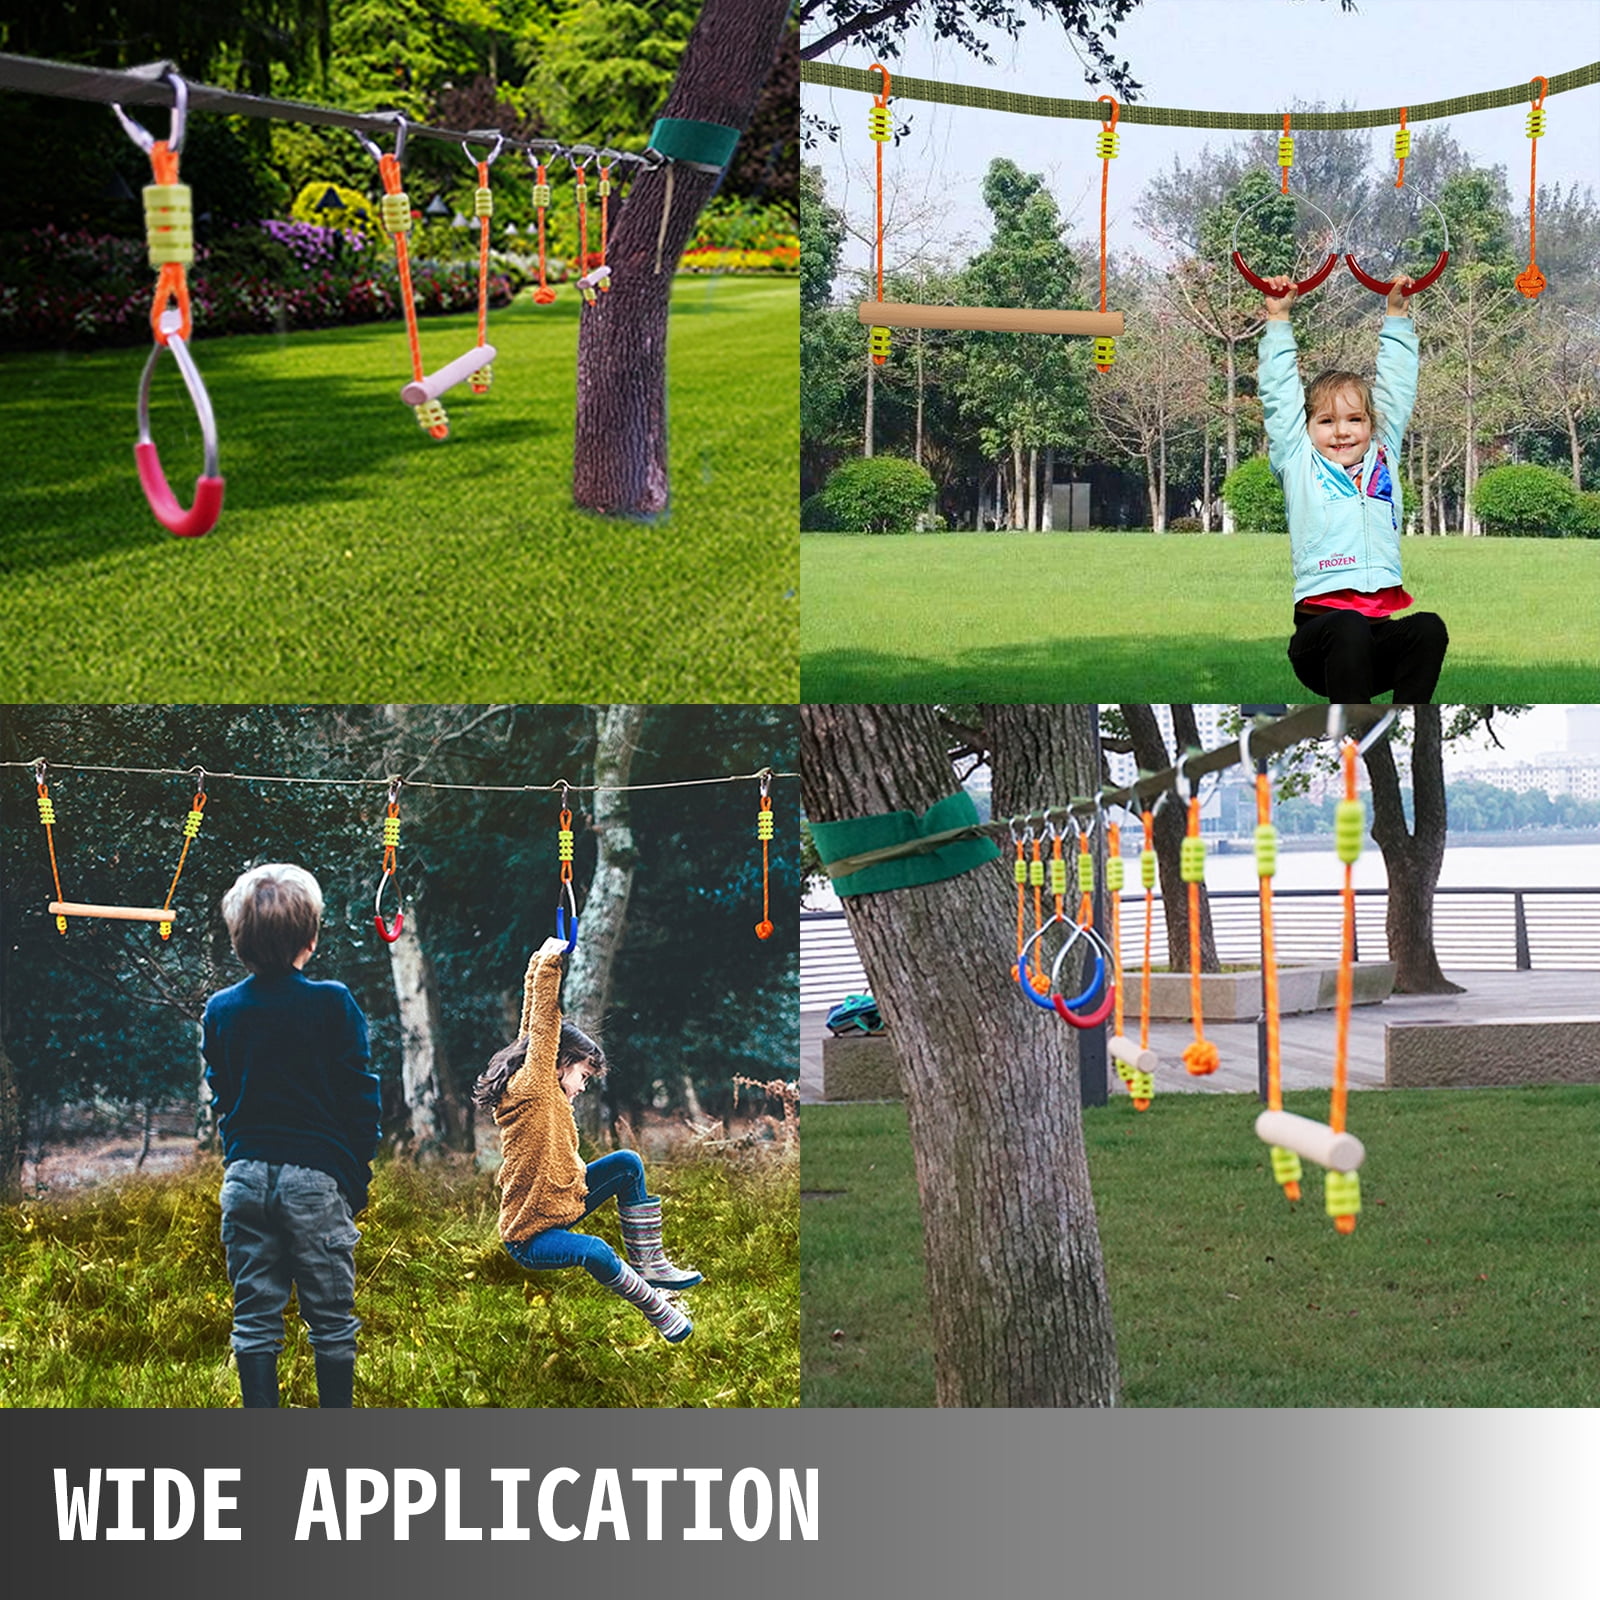 46 FT Slackline with 11 Obstacles Gymnastics Set Including Monkey Bar Zipline Swing Climbing Ladder for Backyard Boys Girls Age 6+ Happy Pie Ninja Warrior Obstacle Course Training Equipment for Kids 